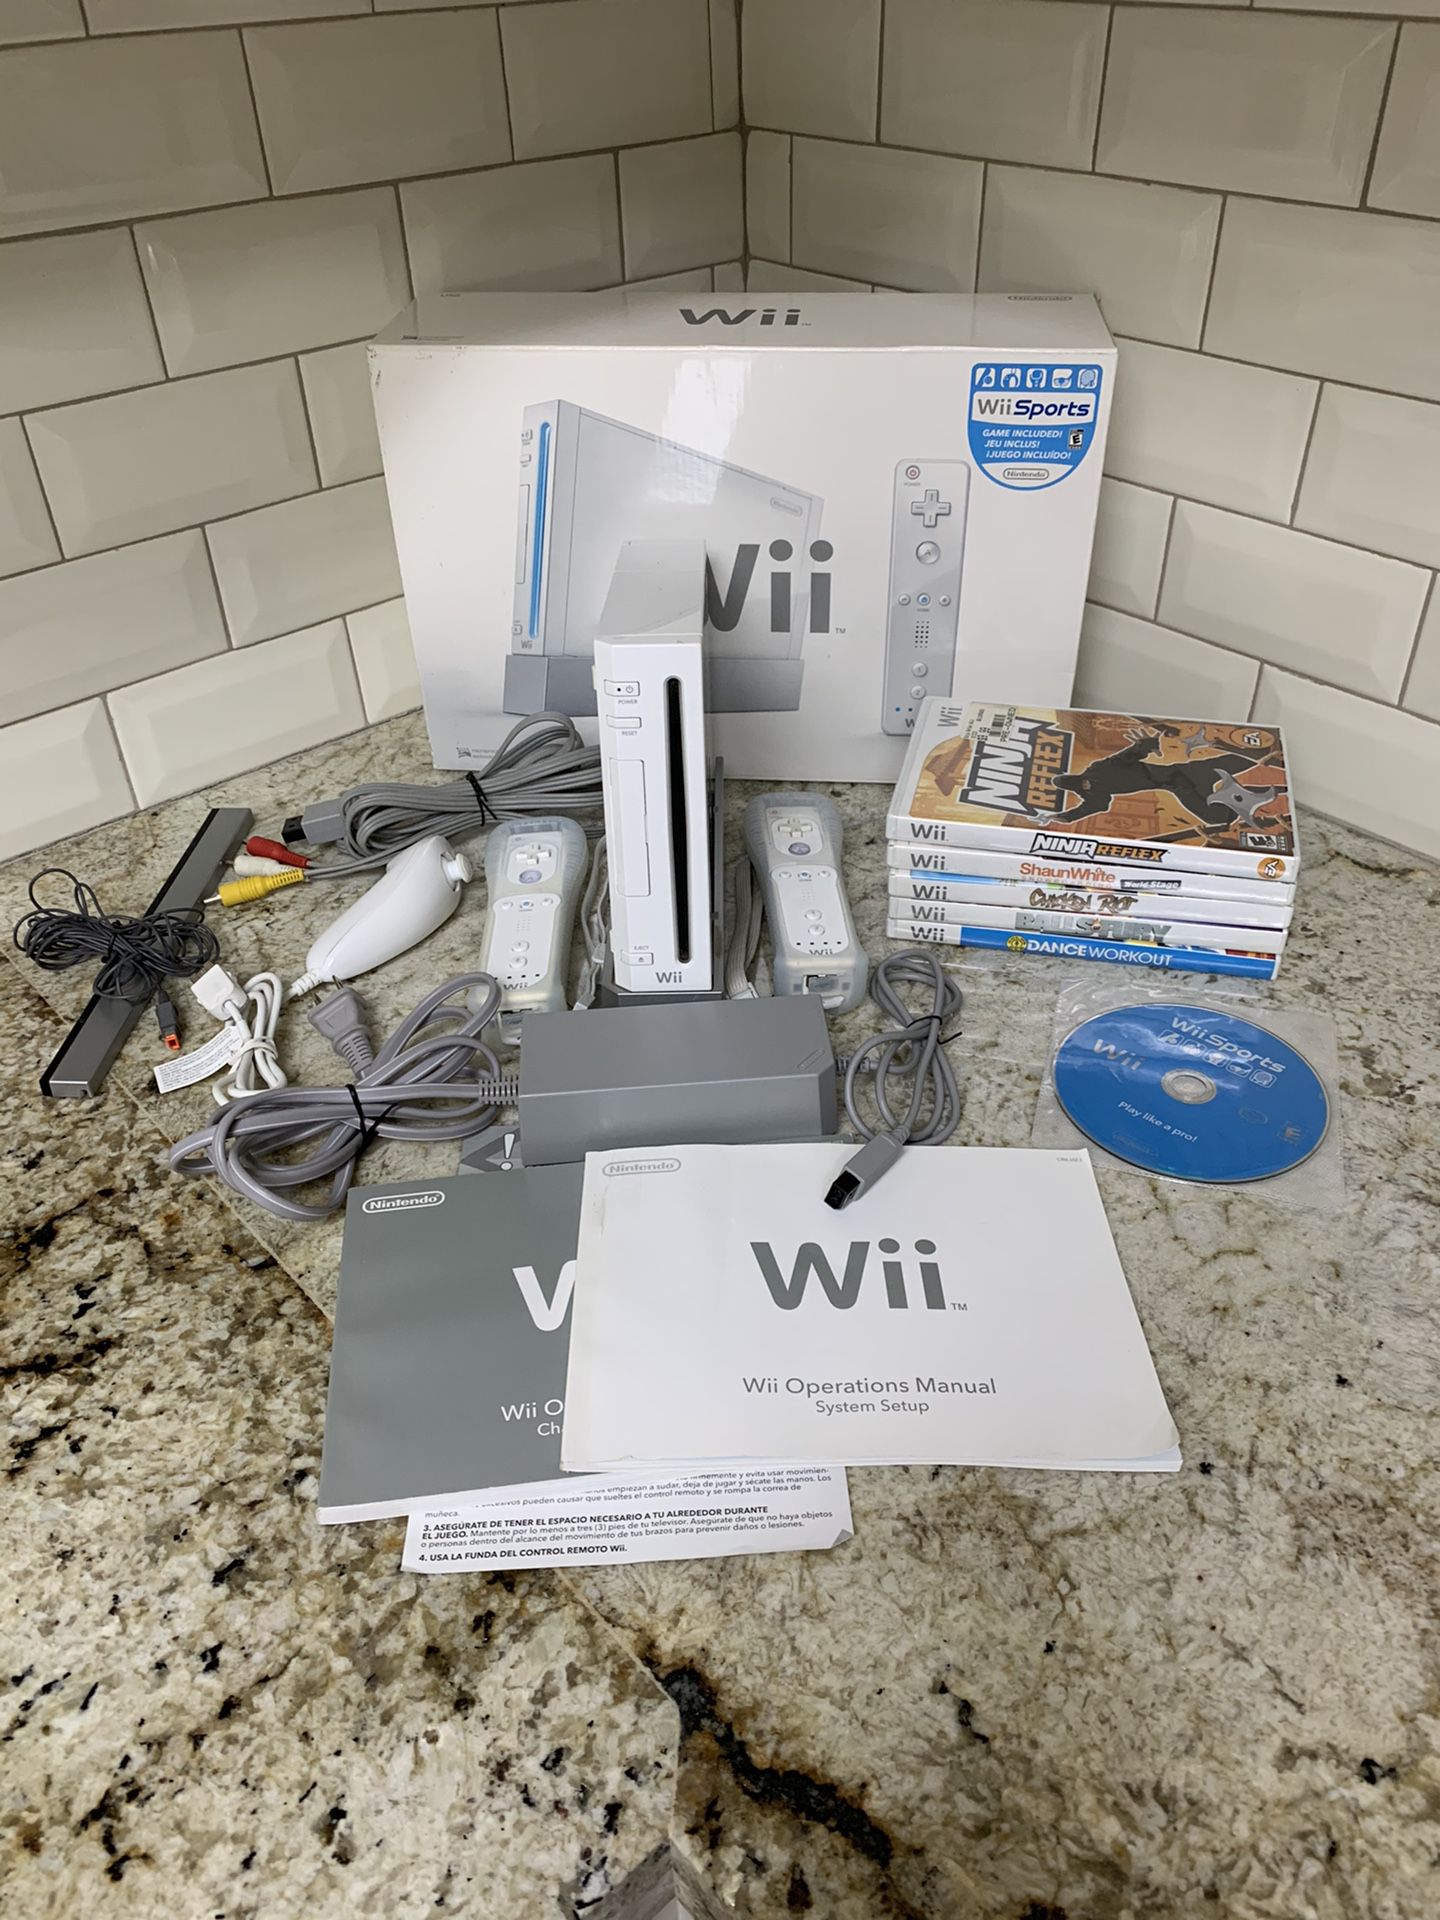 Pre-Owned Working Nintendo Wii Sports Bundle